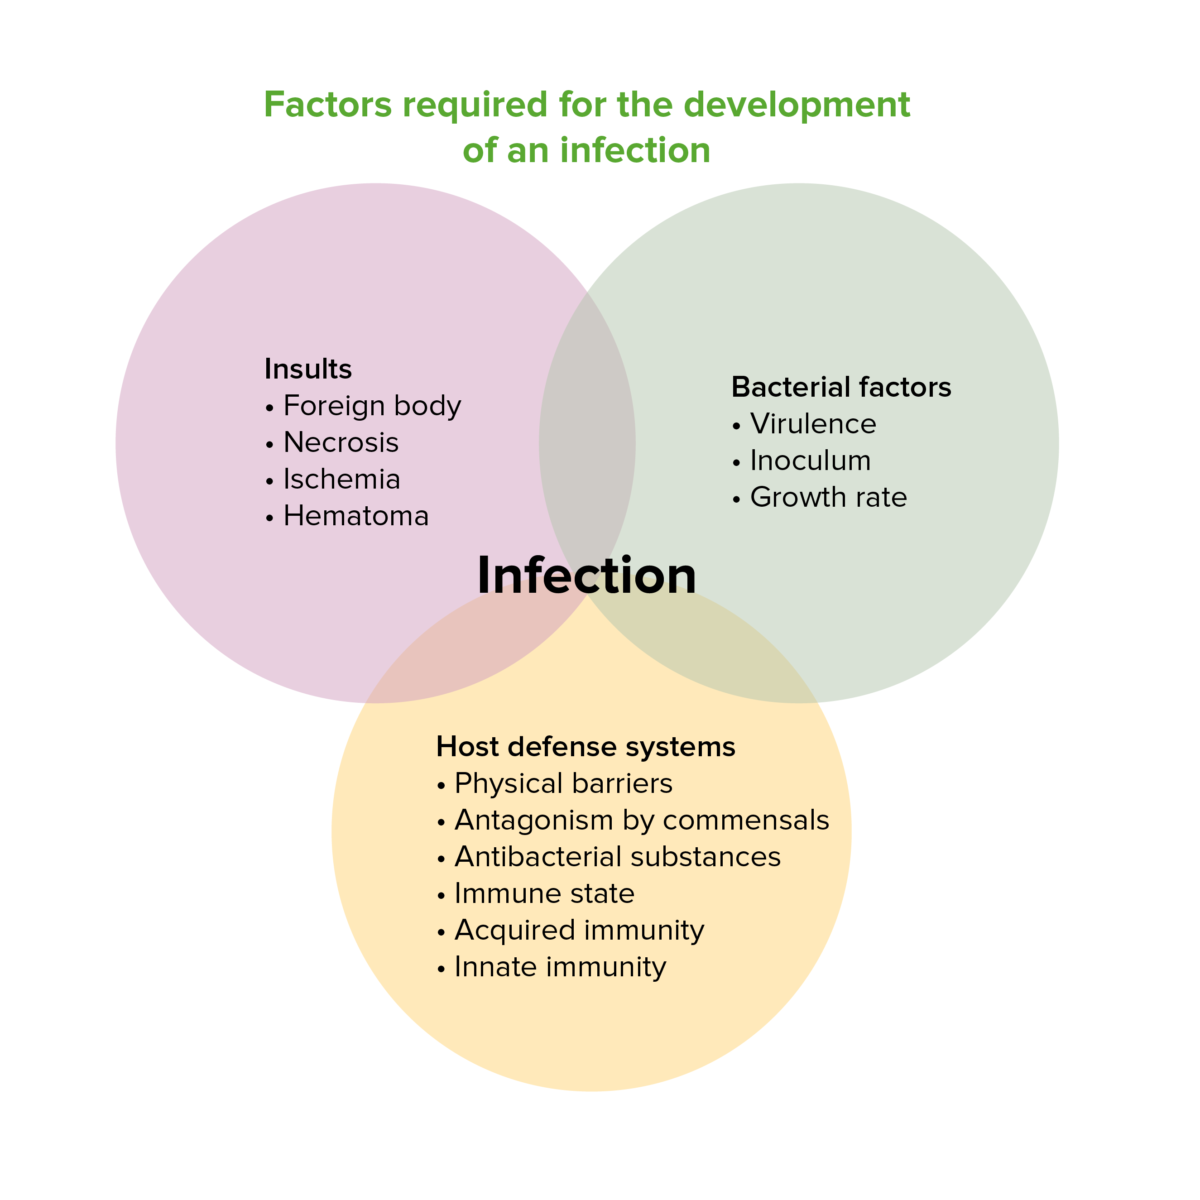 Factors required for the development of an infection